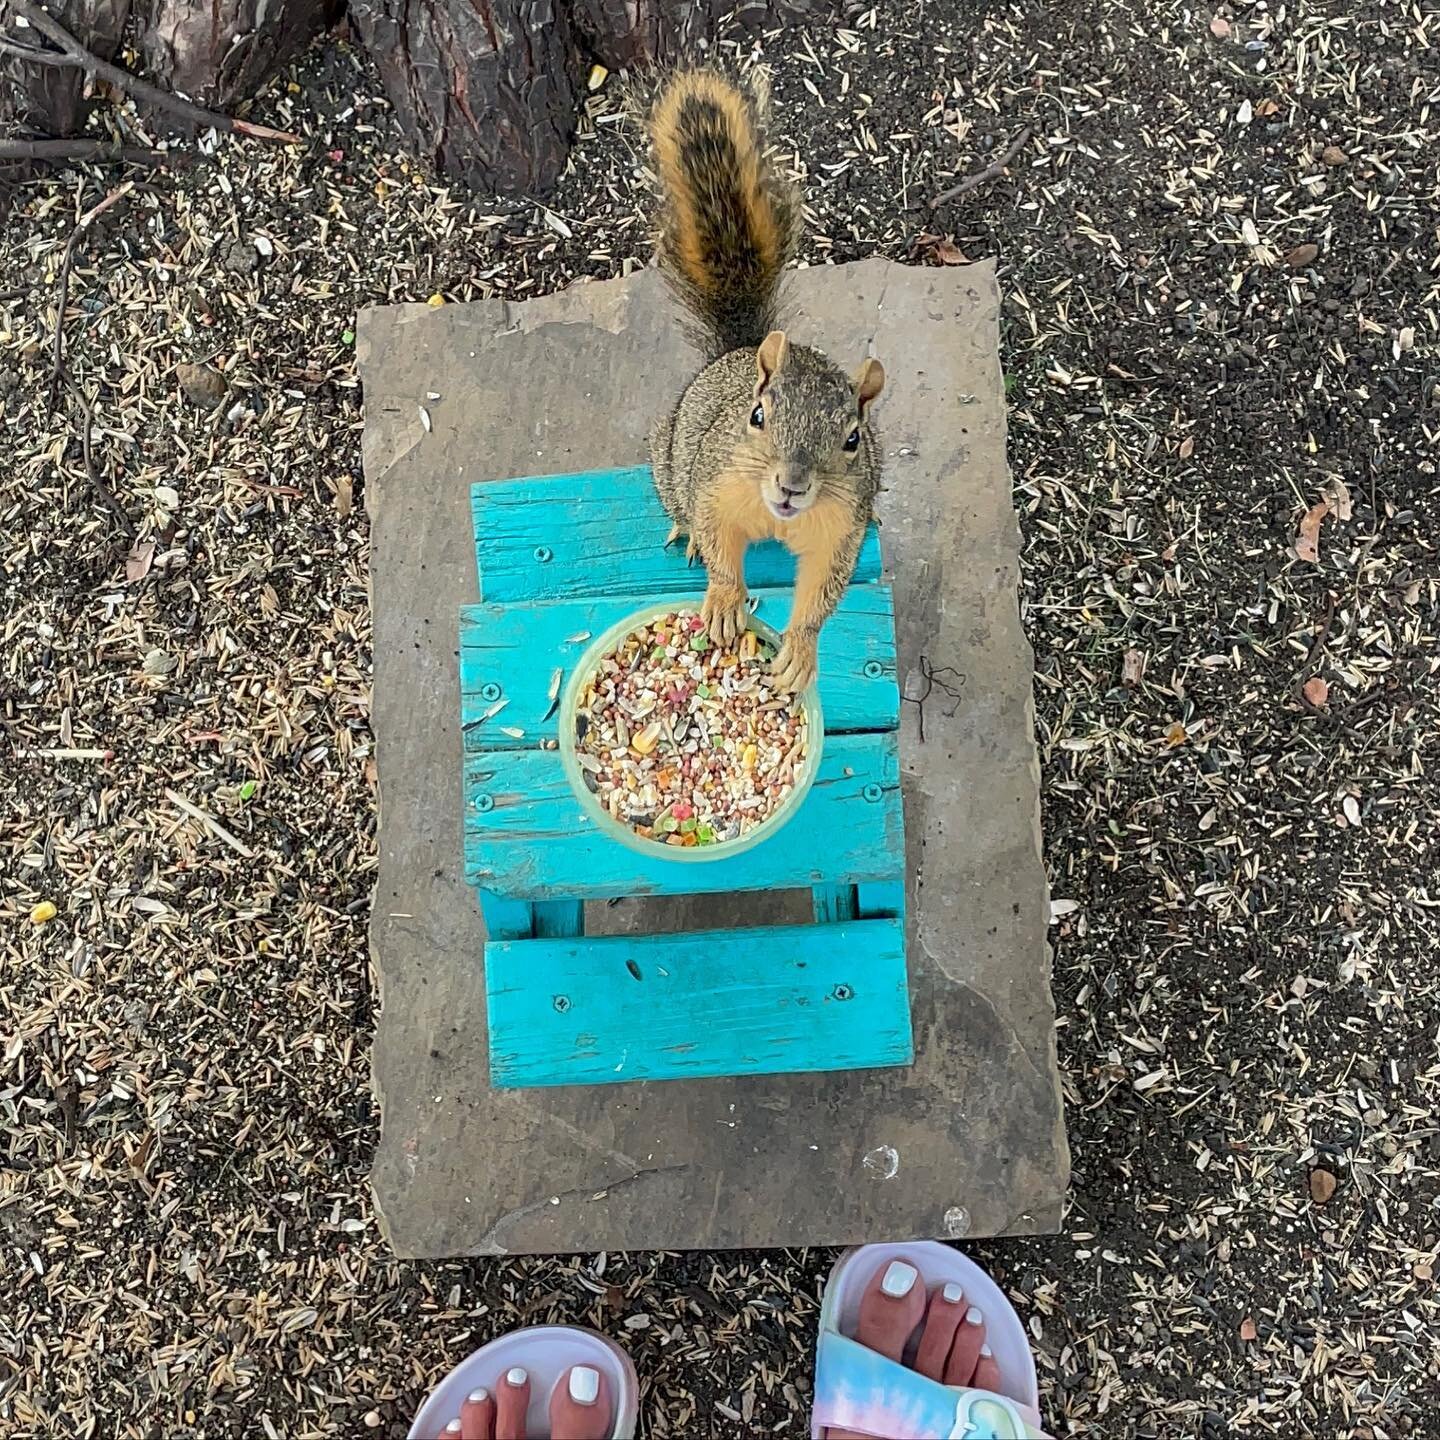 Lulu Consuelo Rodriguez Lopez Garcia de Jesus says &ldquo;Thank you!&rdquo; for breakfast🥰! Also she threw the strawberry 🍓😏. And I told you- this is now a wildlife account🐿. Ok, maybe not totally, but stories disappearing is dumb🙄. And no one c